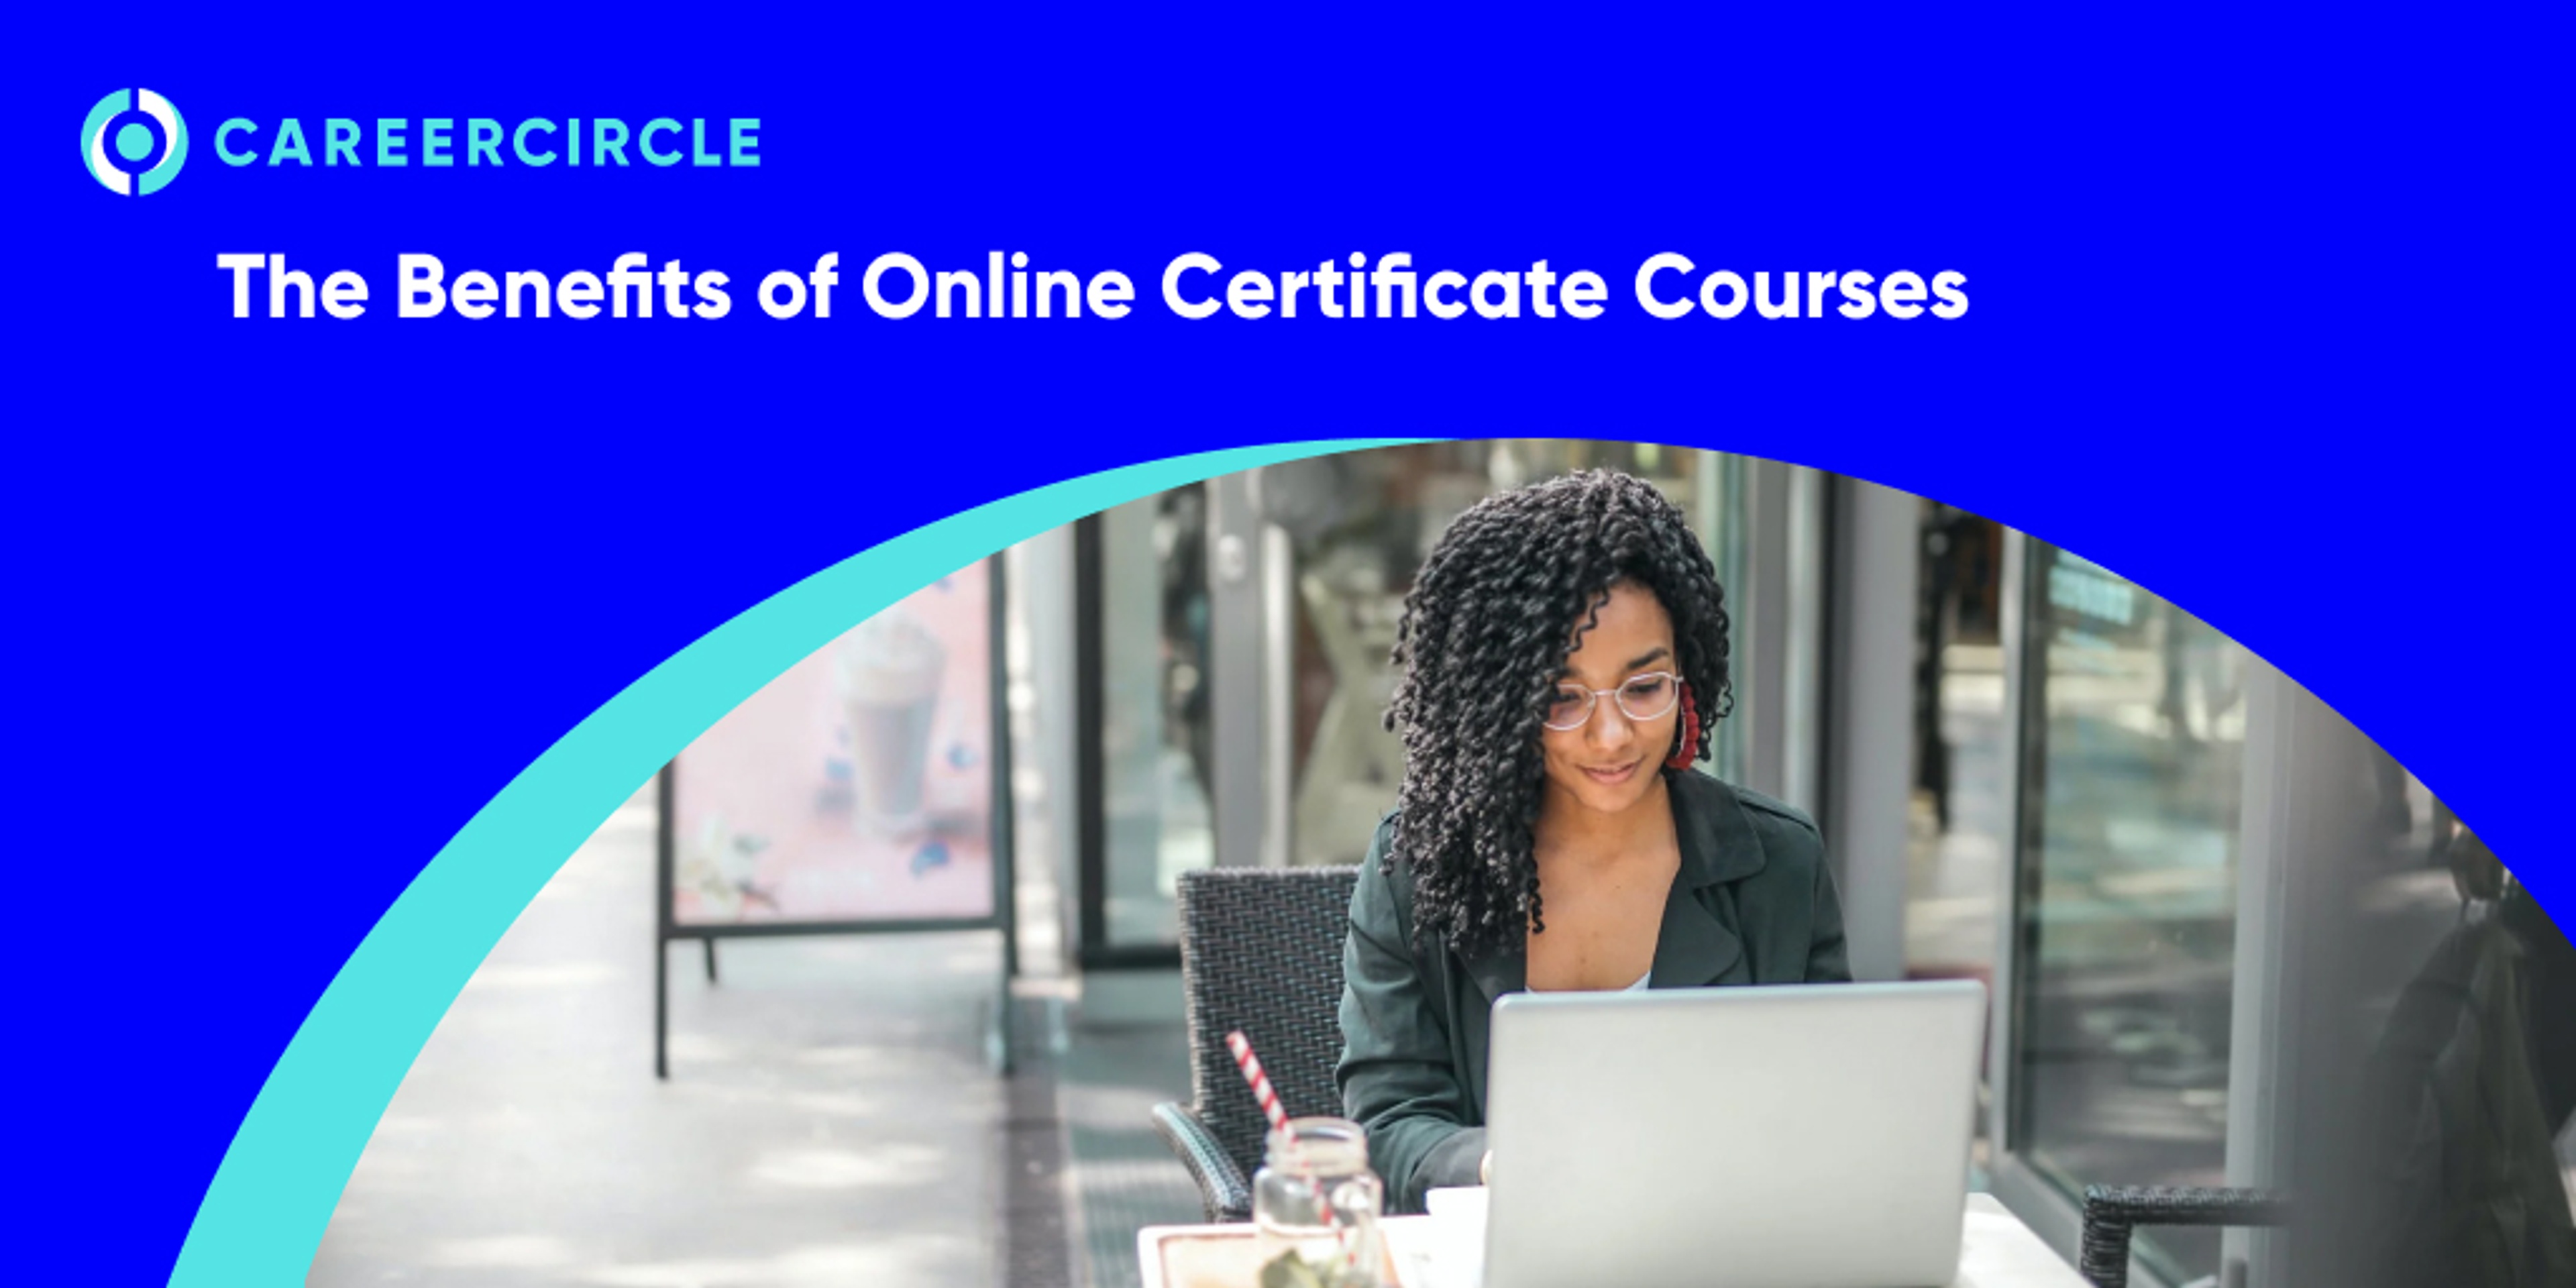 CareerCircle - "The Benefits of Online Certificate Courses" image of a woman sitting in front of a laptop